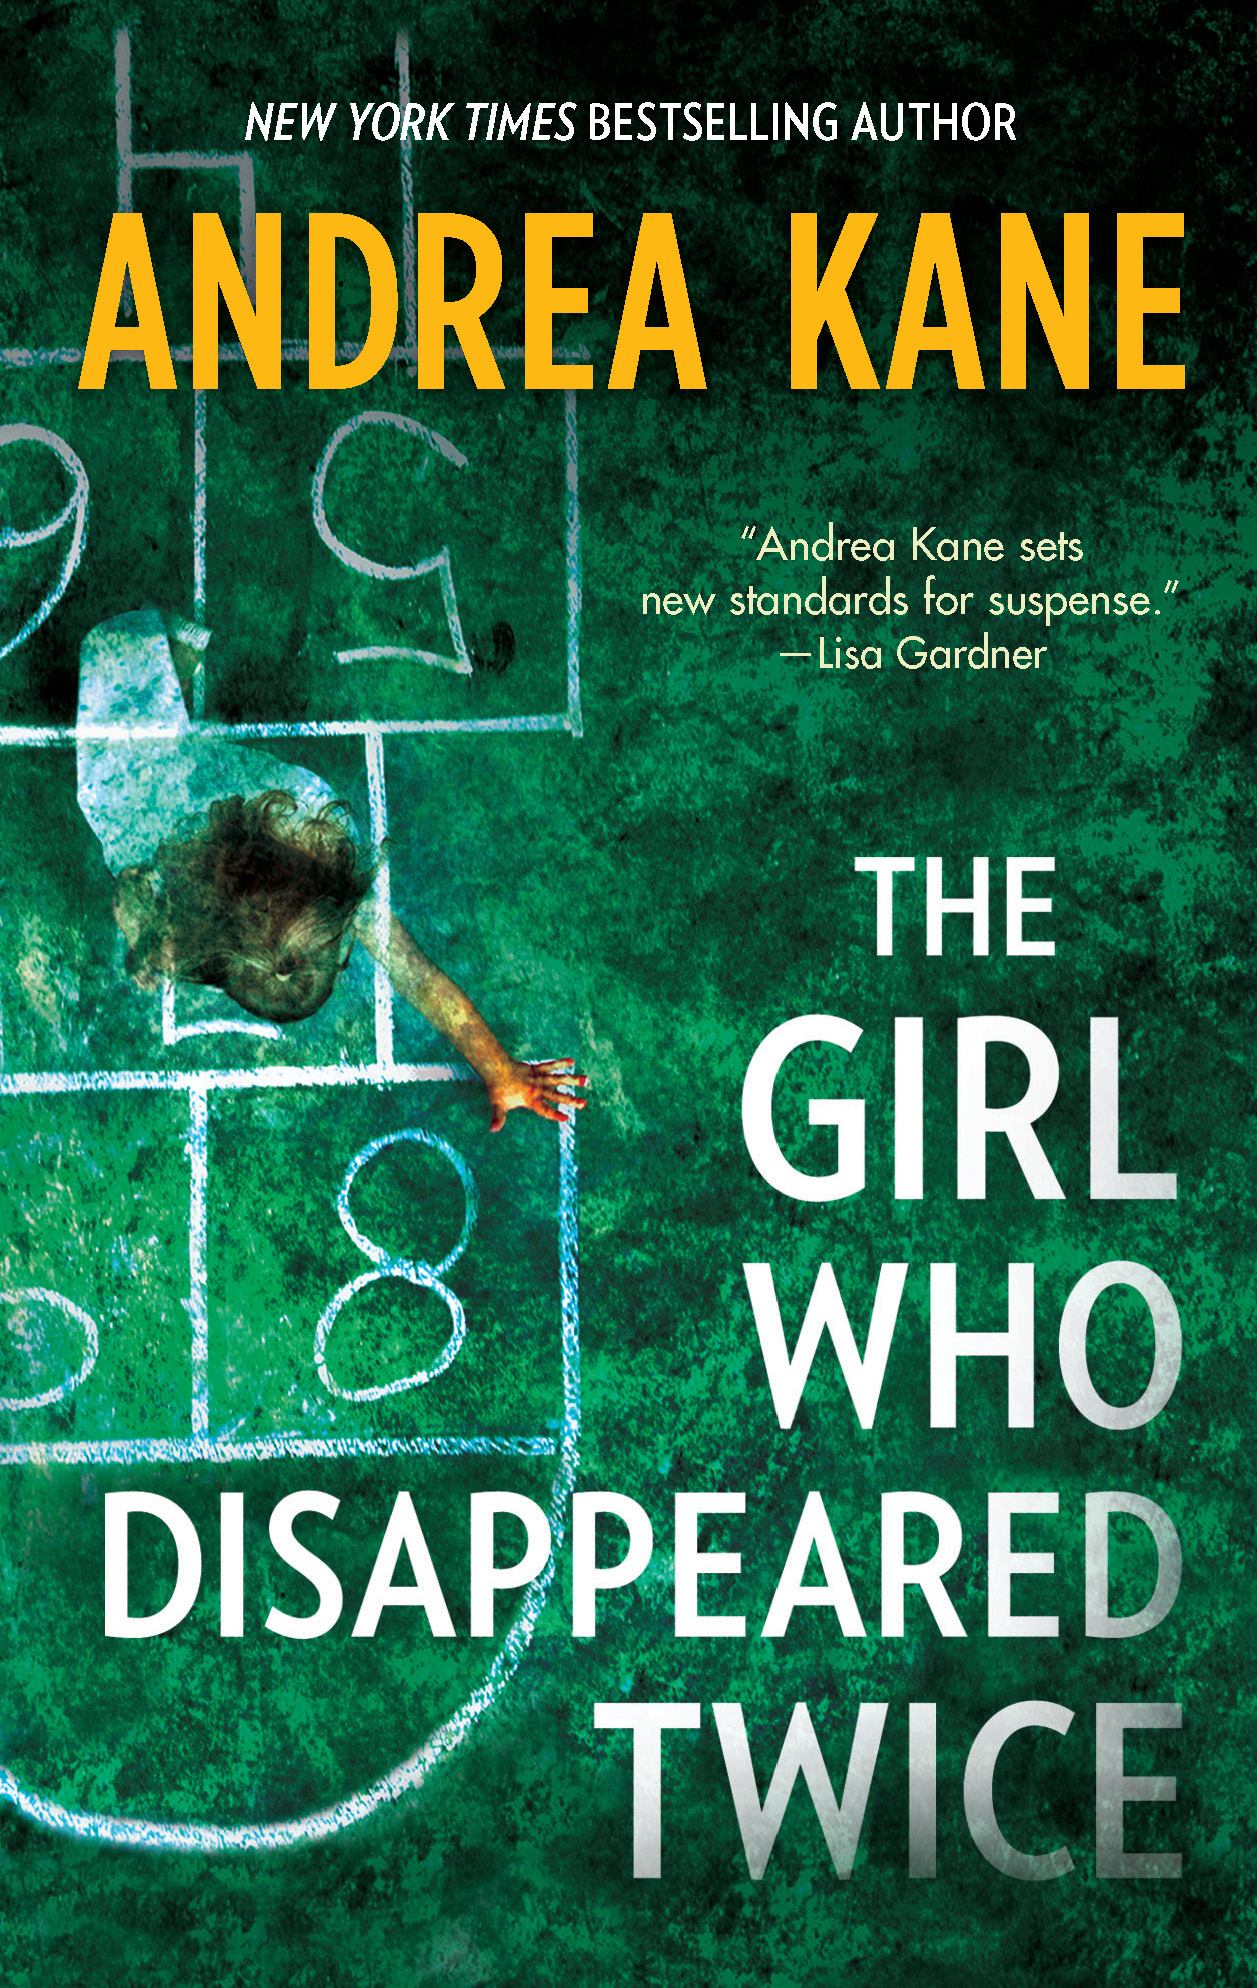 The Girl Who Disappeared Twice Image